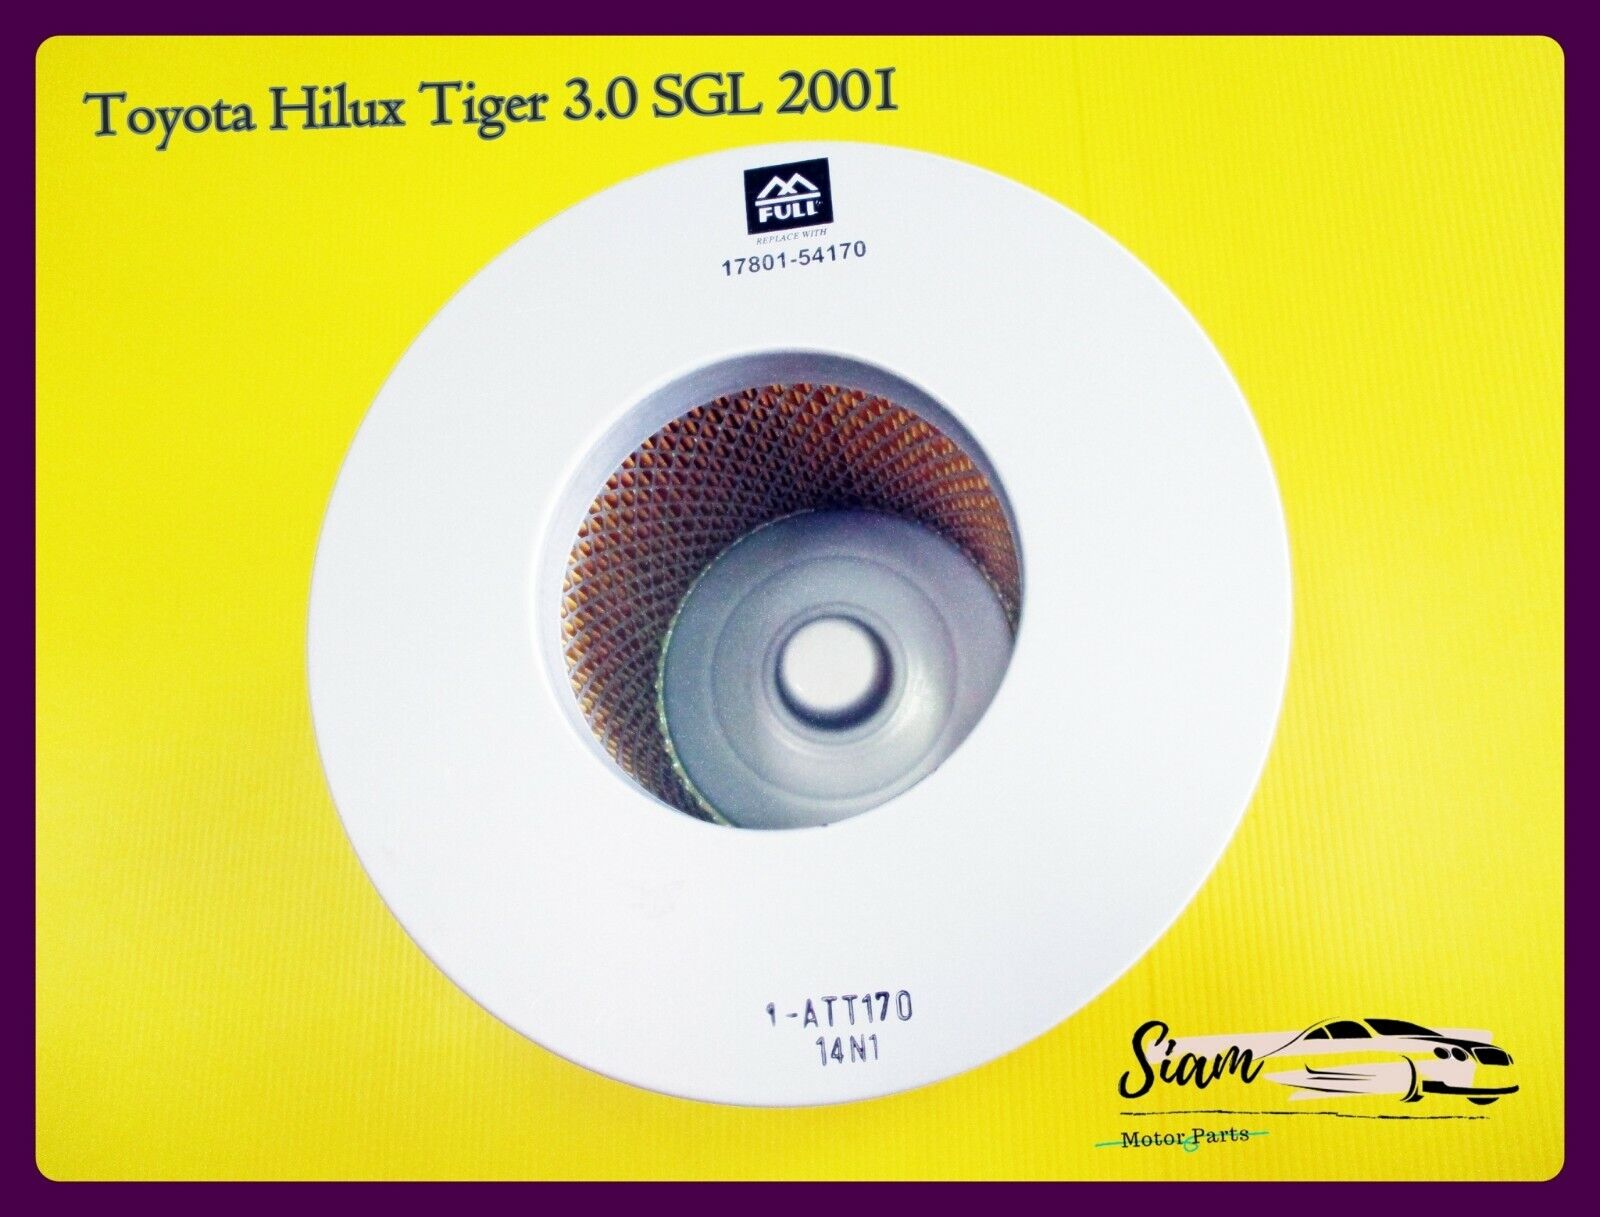 With for Toyota Hilux Tiger 3.0 SGL 2001   Air Filter **si1122**